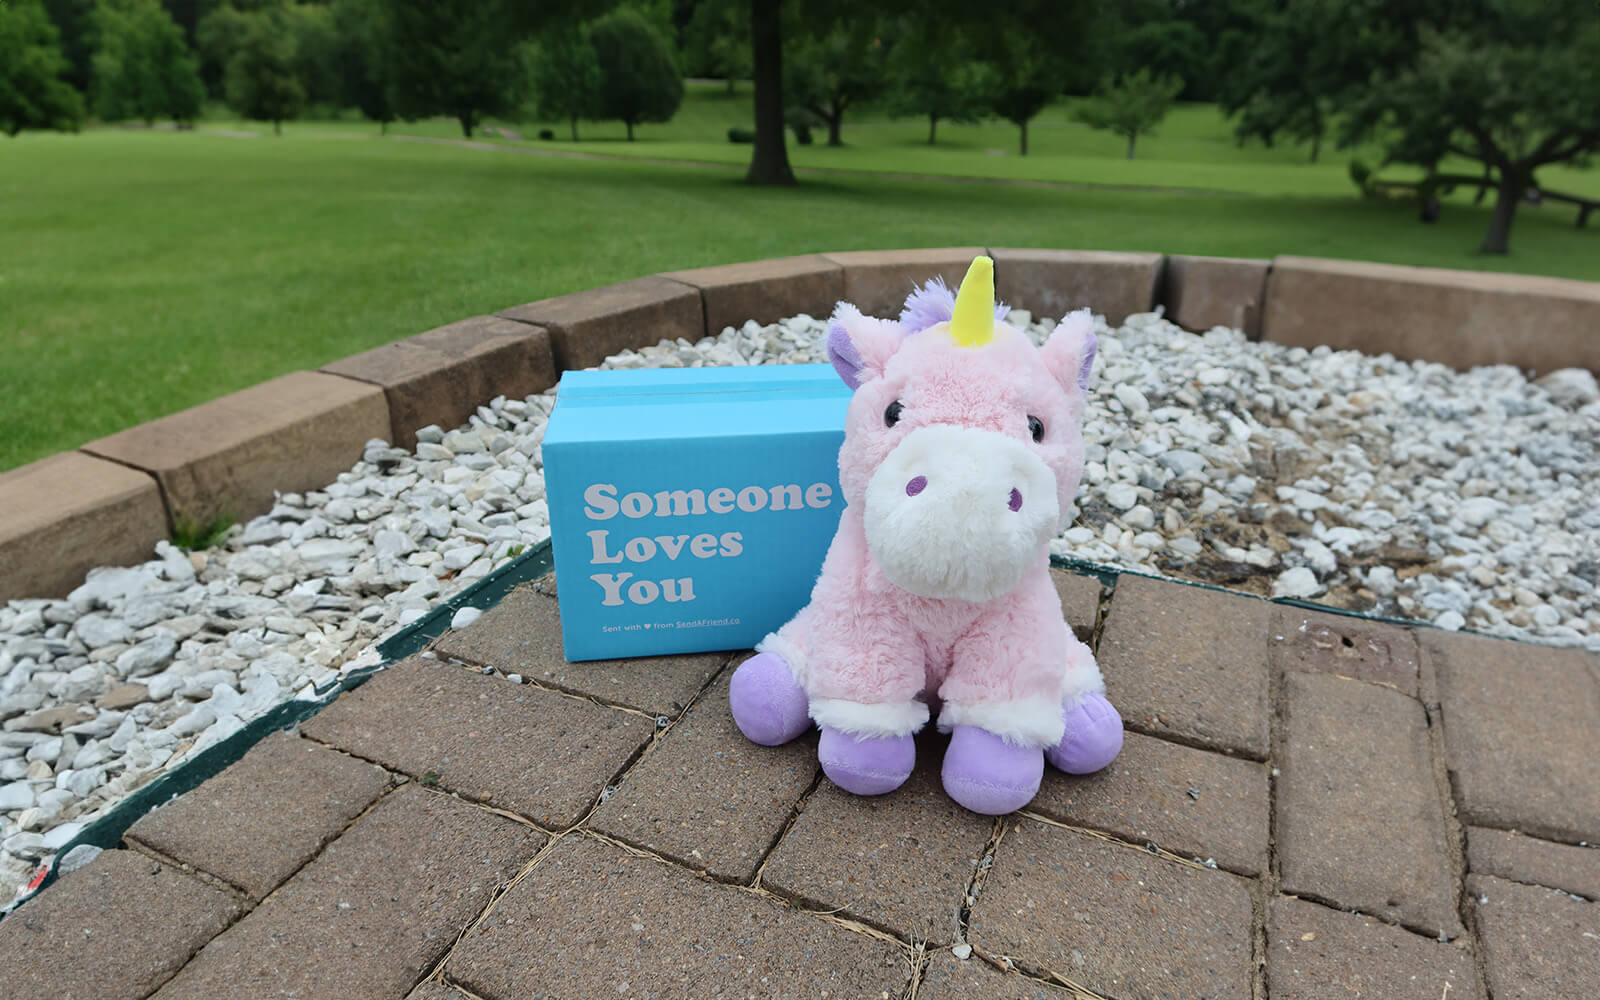 Image of Unique the Unicorn sitting outdoors with the Someone Loves You box 